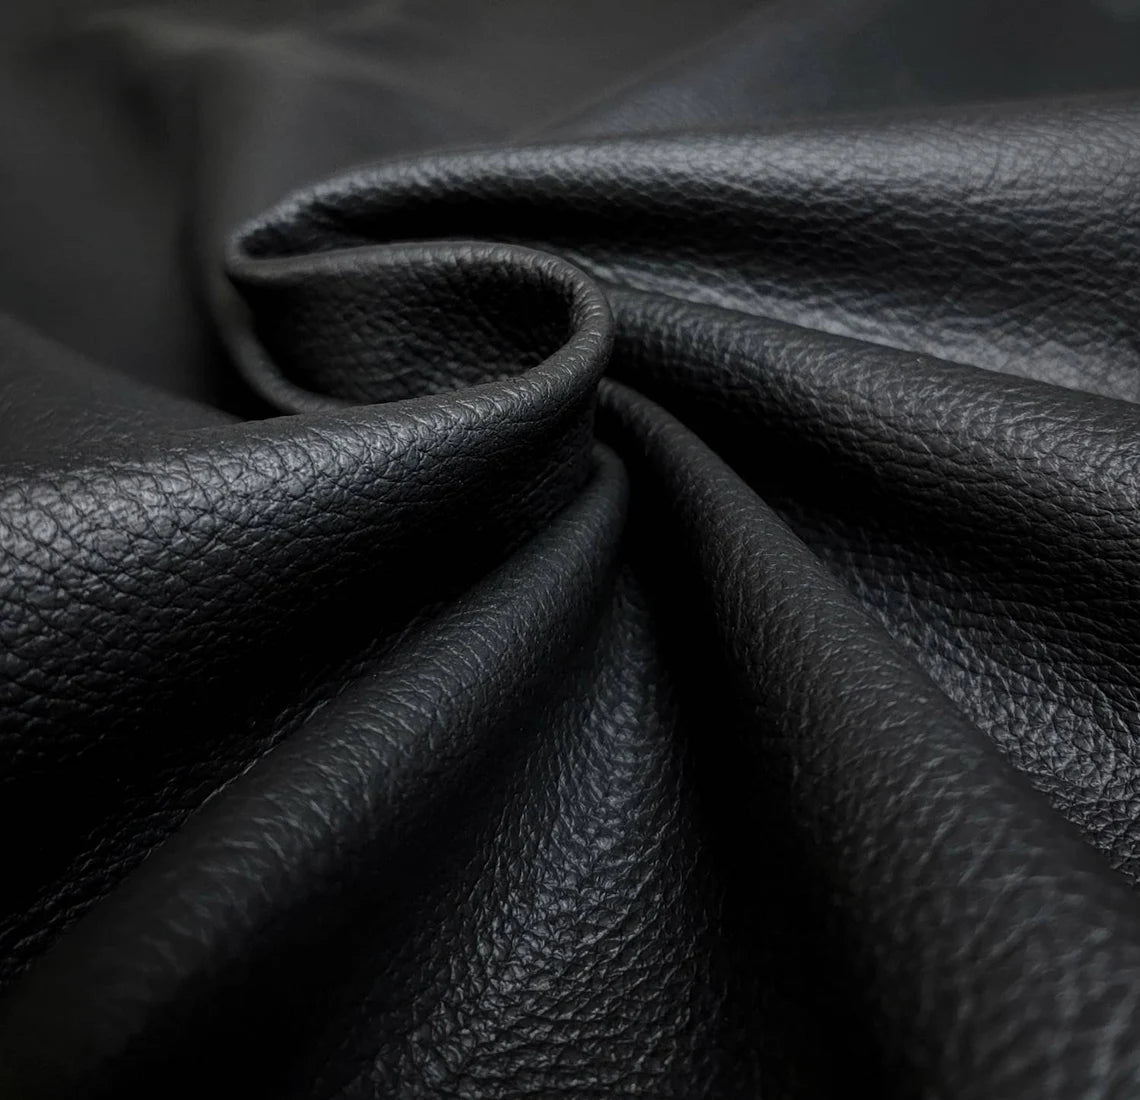 Black Cow Hide Elite Leather Skins 20 x 24 Cut Piece 2.5 OZ. Upholstery  Book CHAP NAT Leathers (20 inch x 24 inch)